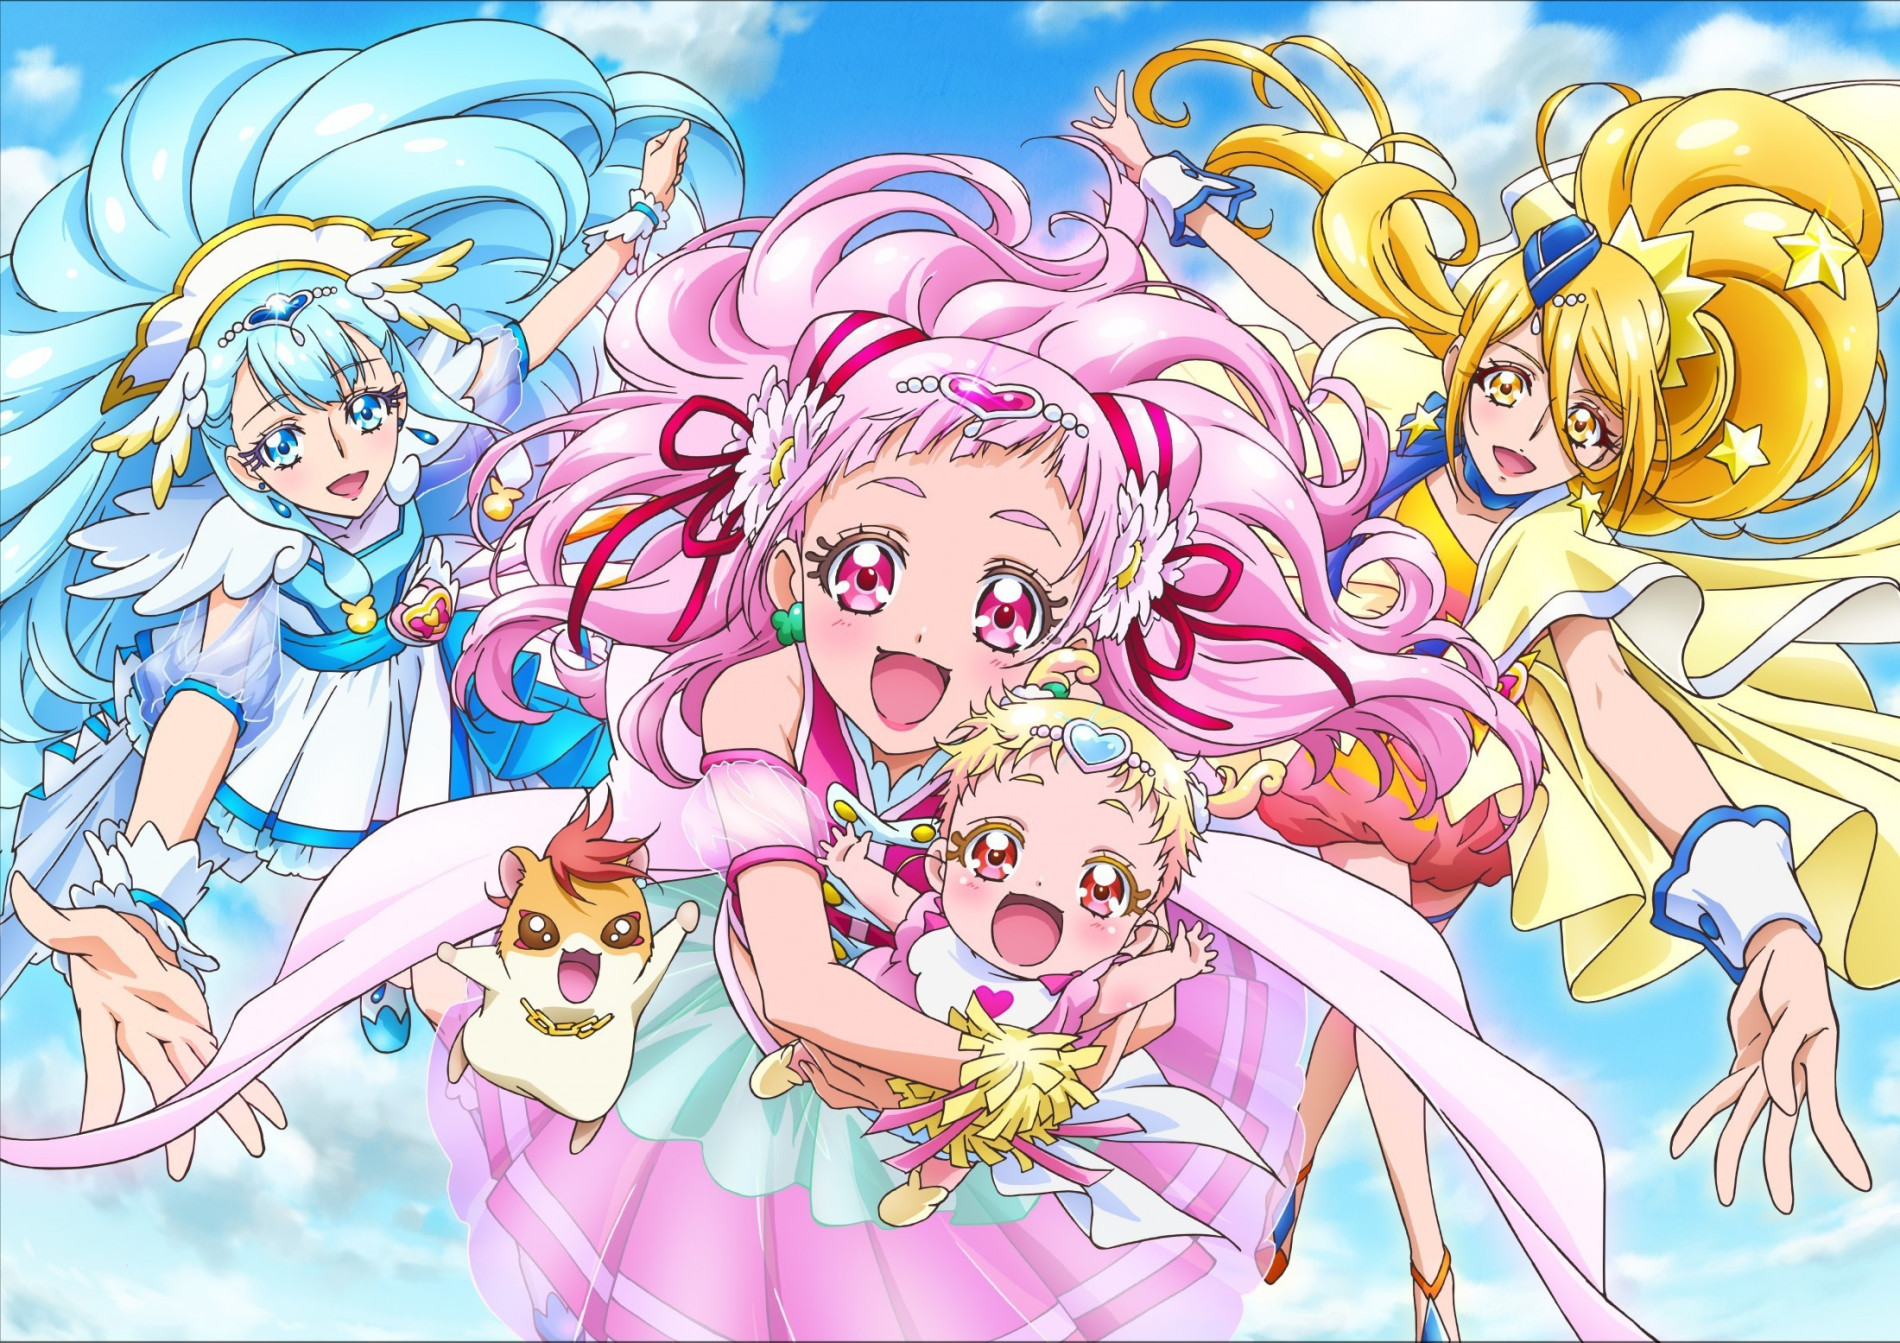 Banner for HUGtto! Precure